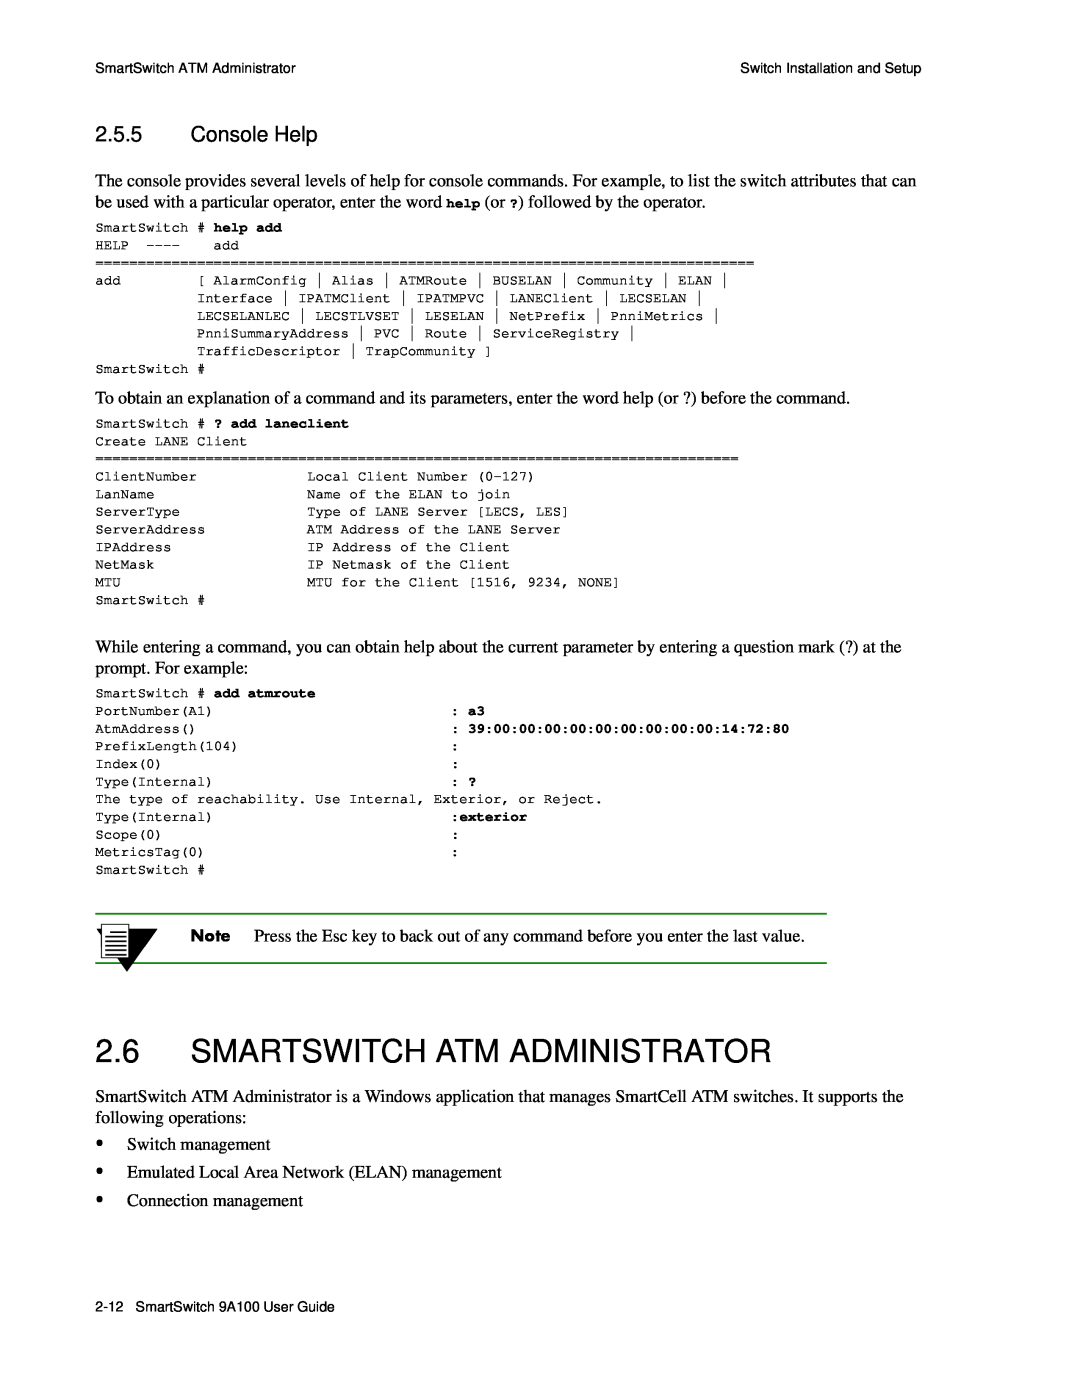 Cabletron Systems 9A100 manual Smartswitch Atm Administrator, Console Help 